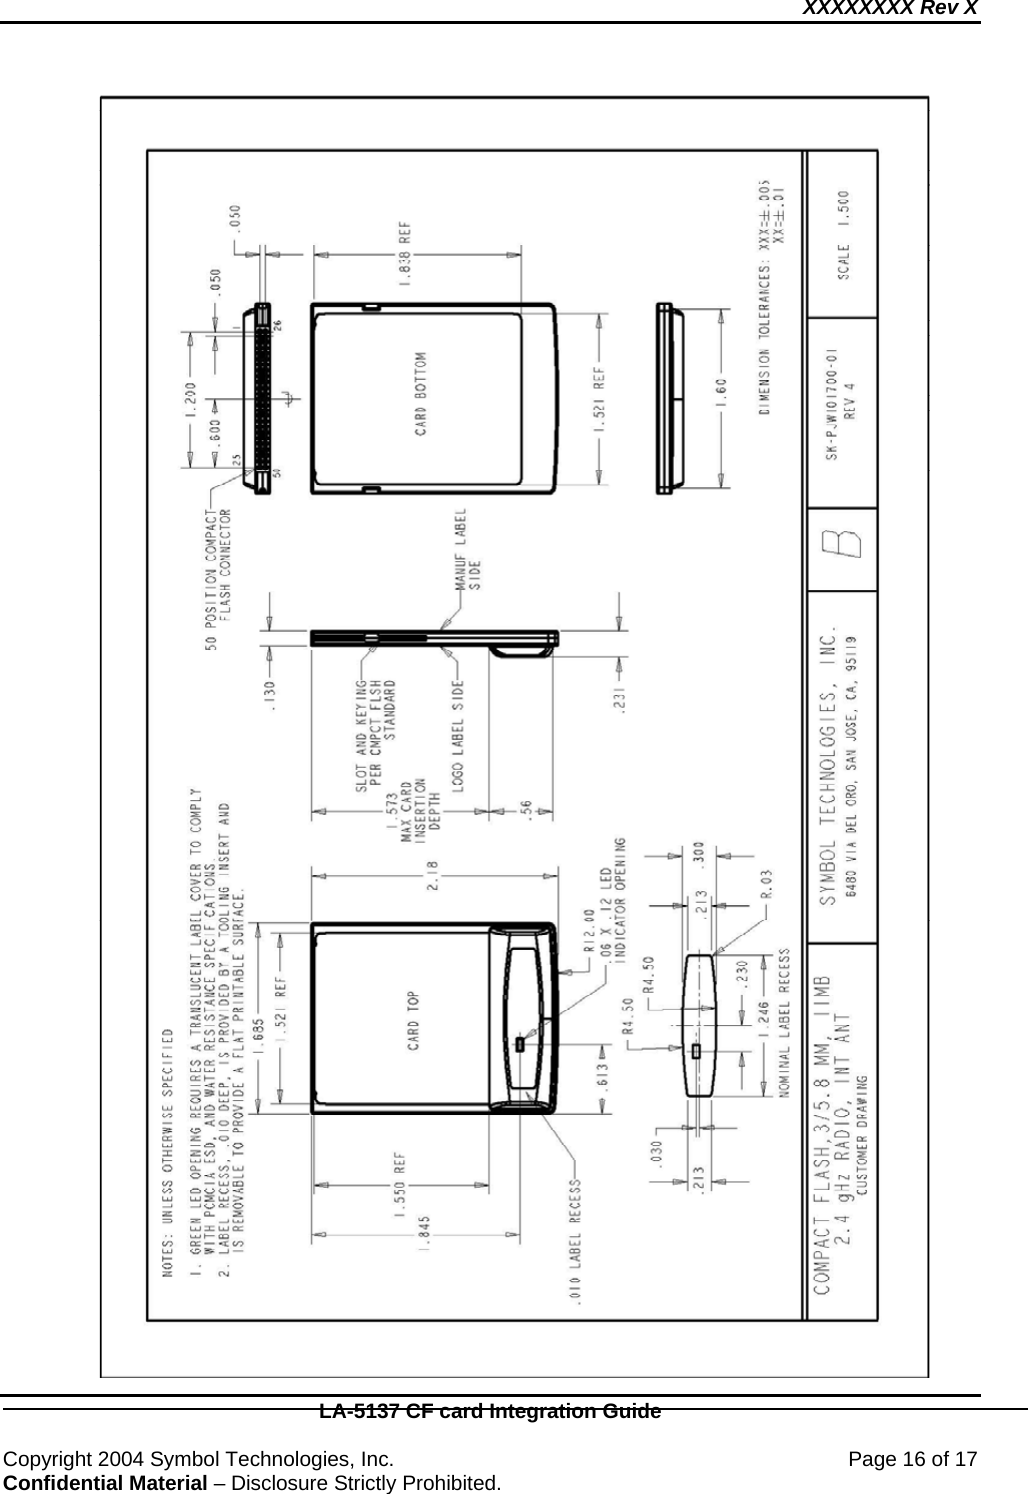 XXXXXXXX Rev X    LA-5137 CF card Integration Guide  Copyright 2004 Symbol Technologies, Inc.    Page 16 of 17 Confidential Material – Disclosure Strictly Prohibited.  